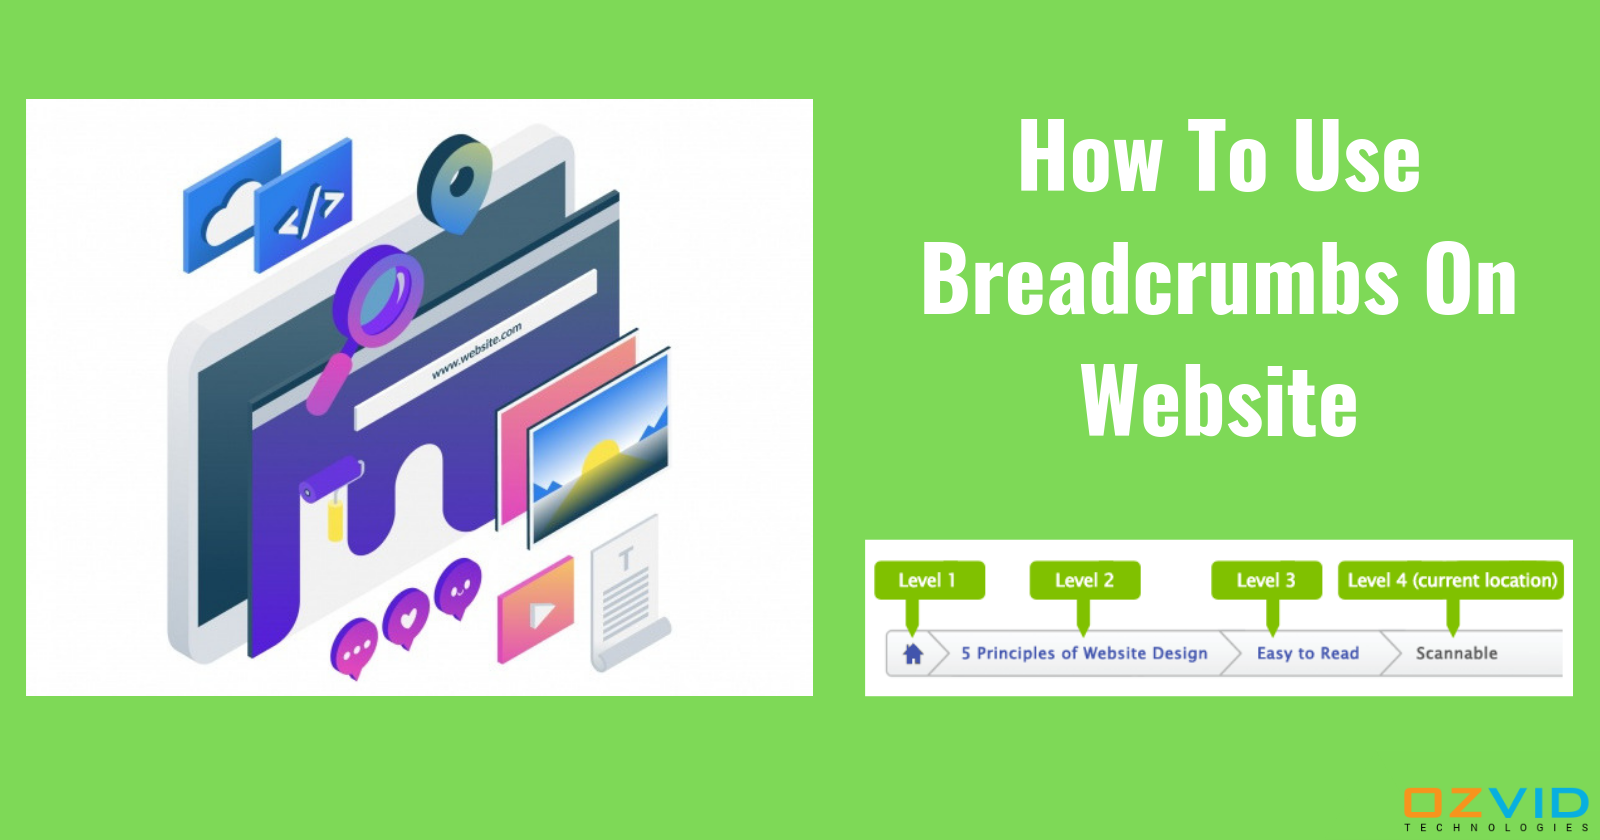 Why Breadcrumbs Are Important In Web Design?